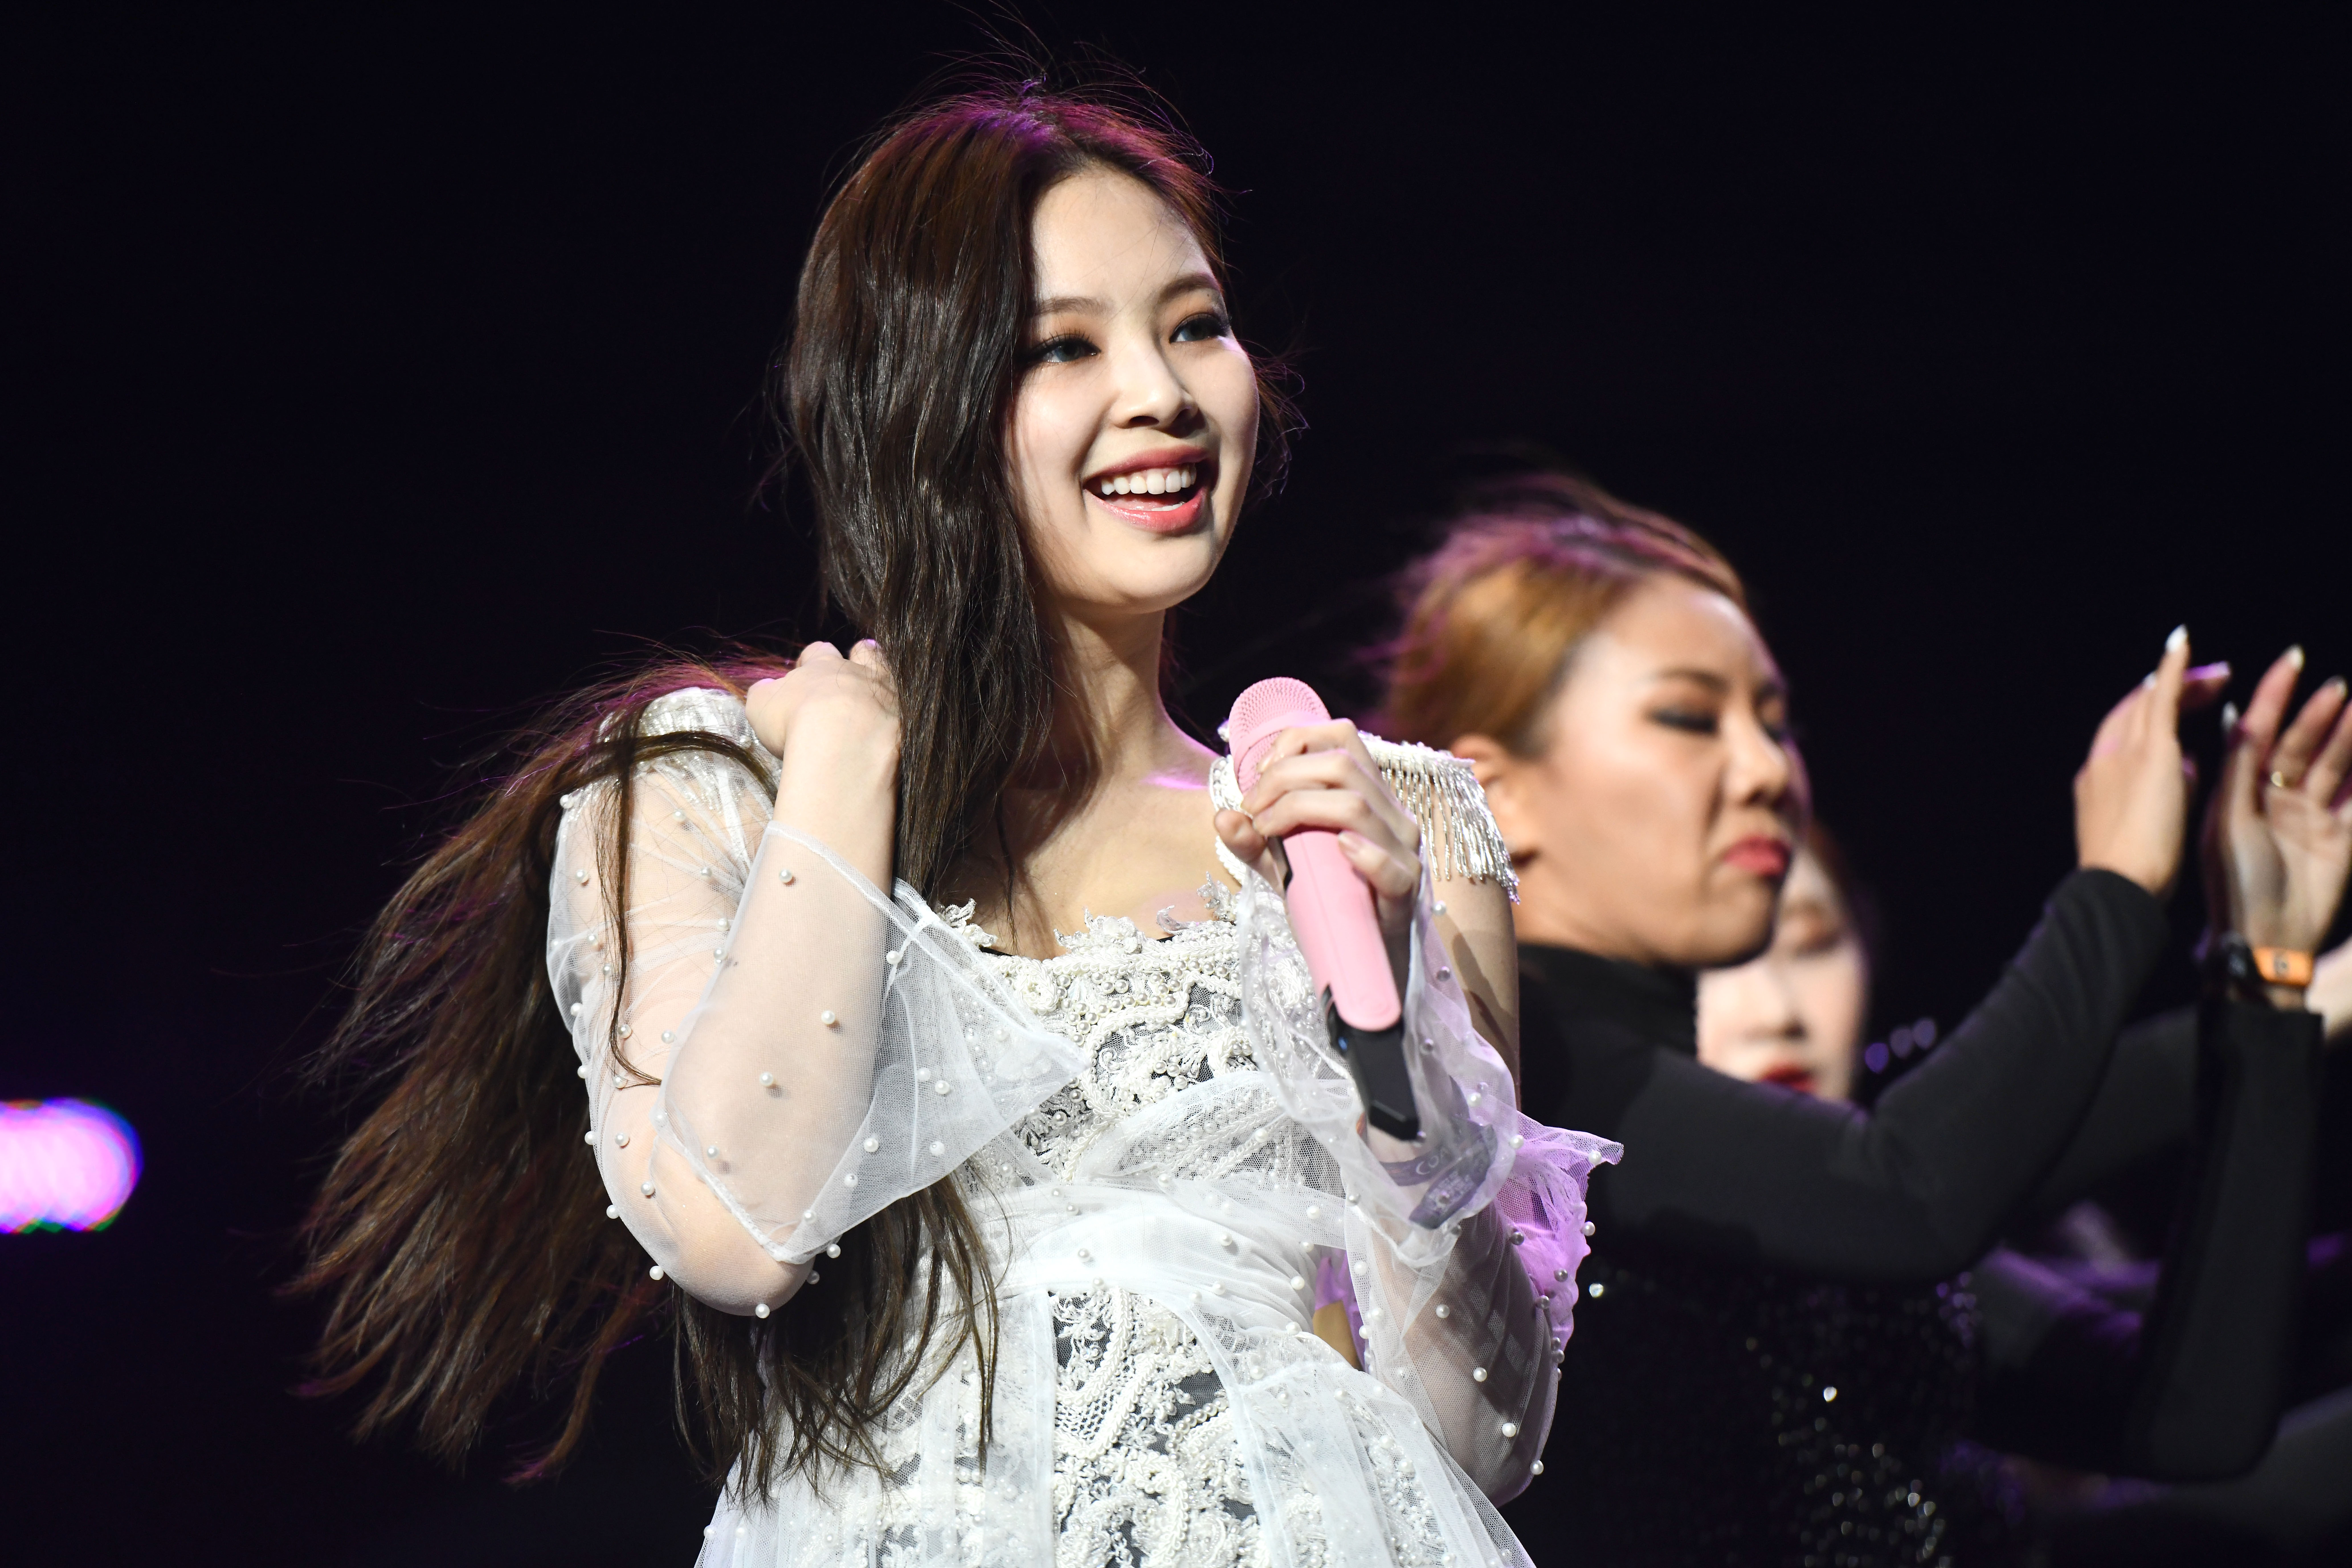 Singer Jennie Kim of BLACKPINK performs onstage during the 2019 Coachella Valley Music and Arts Festival